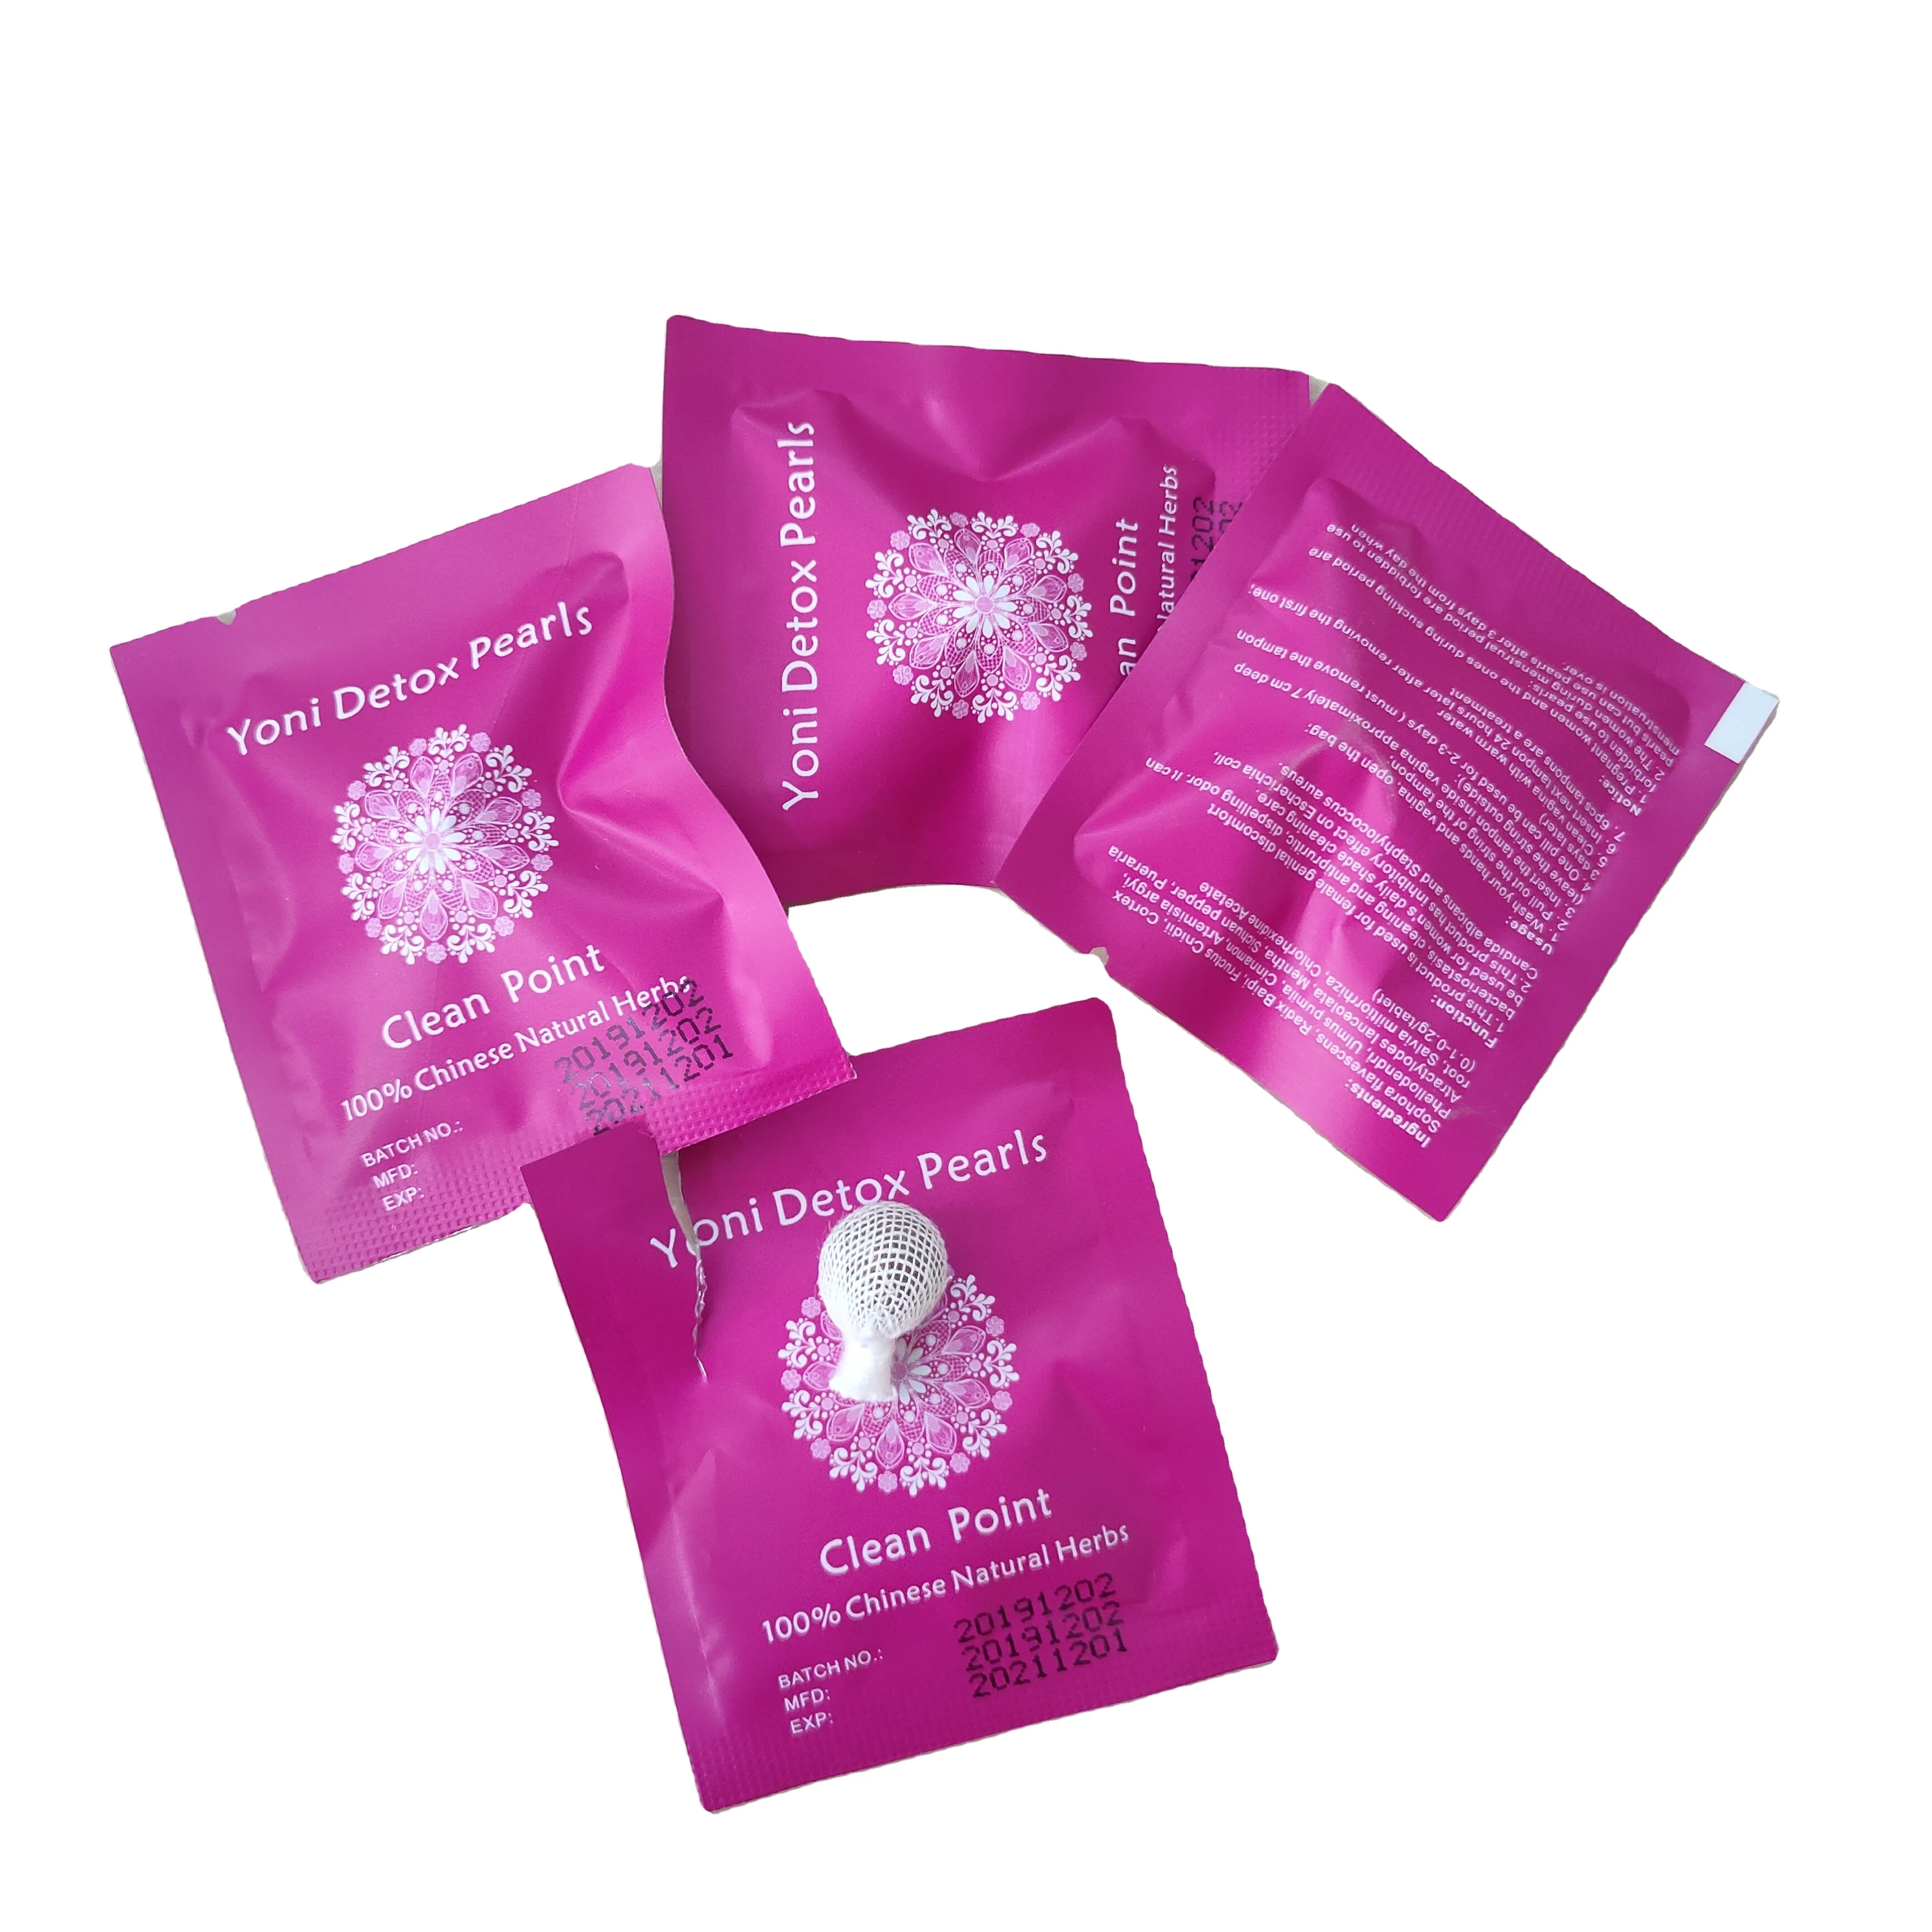 Feminine Health Products Organic Yoni Detox Pearls For Womb Wellness Women Vaginal Cleansing Healing Female Detox Pearls, Brown